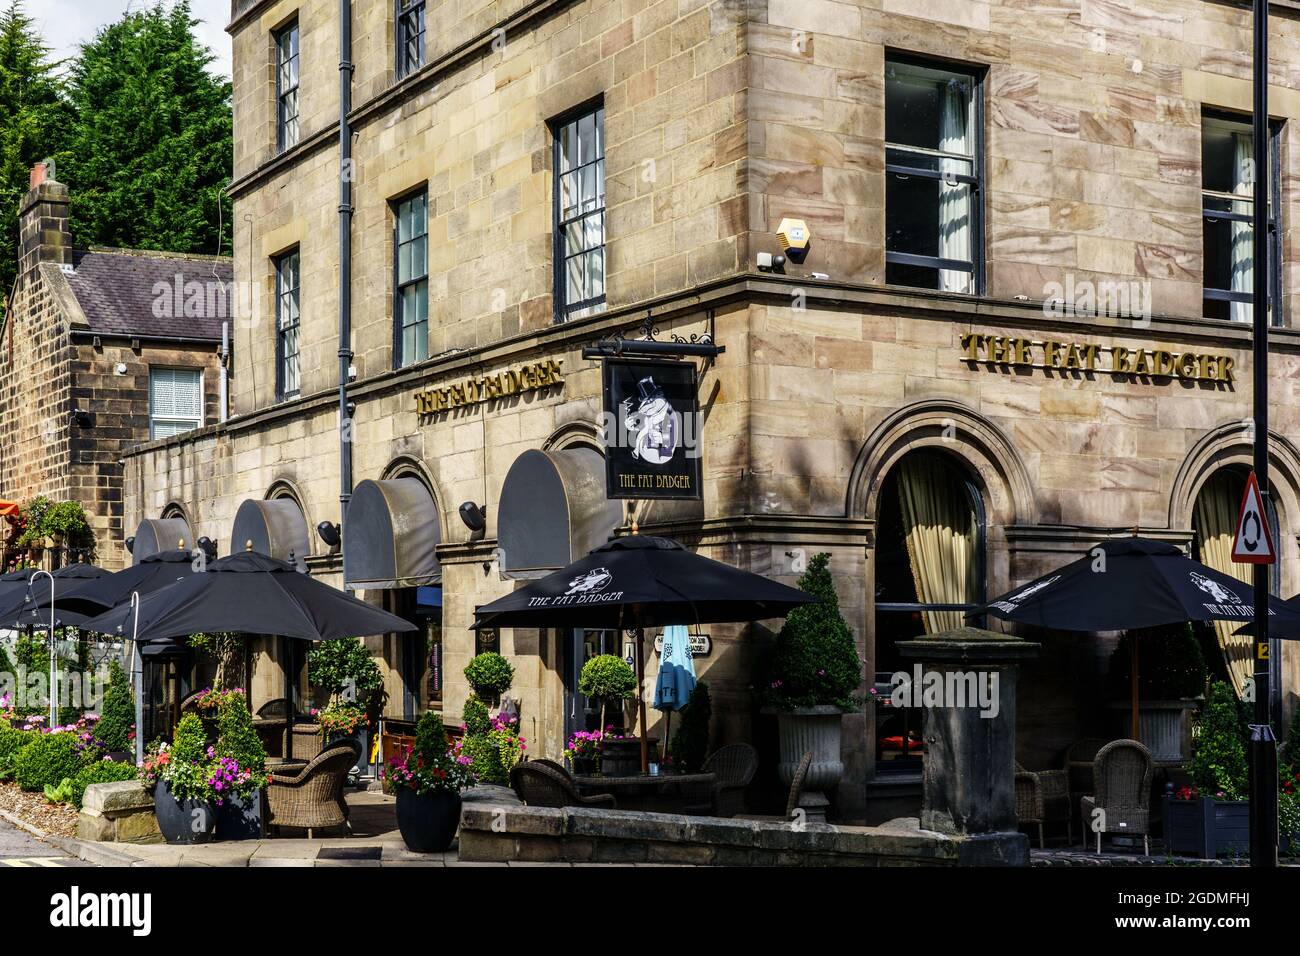 Harrogate's The Fat Badger Grill/Public House, known for its award-winning cuisine and selection of locally brewed craft brews. North Yorkshire, UK. Stock Photo